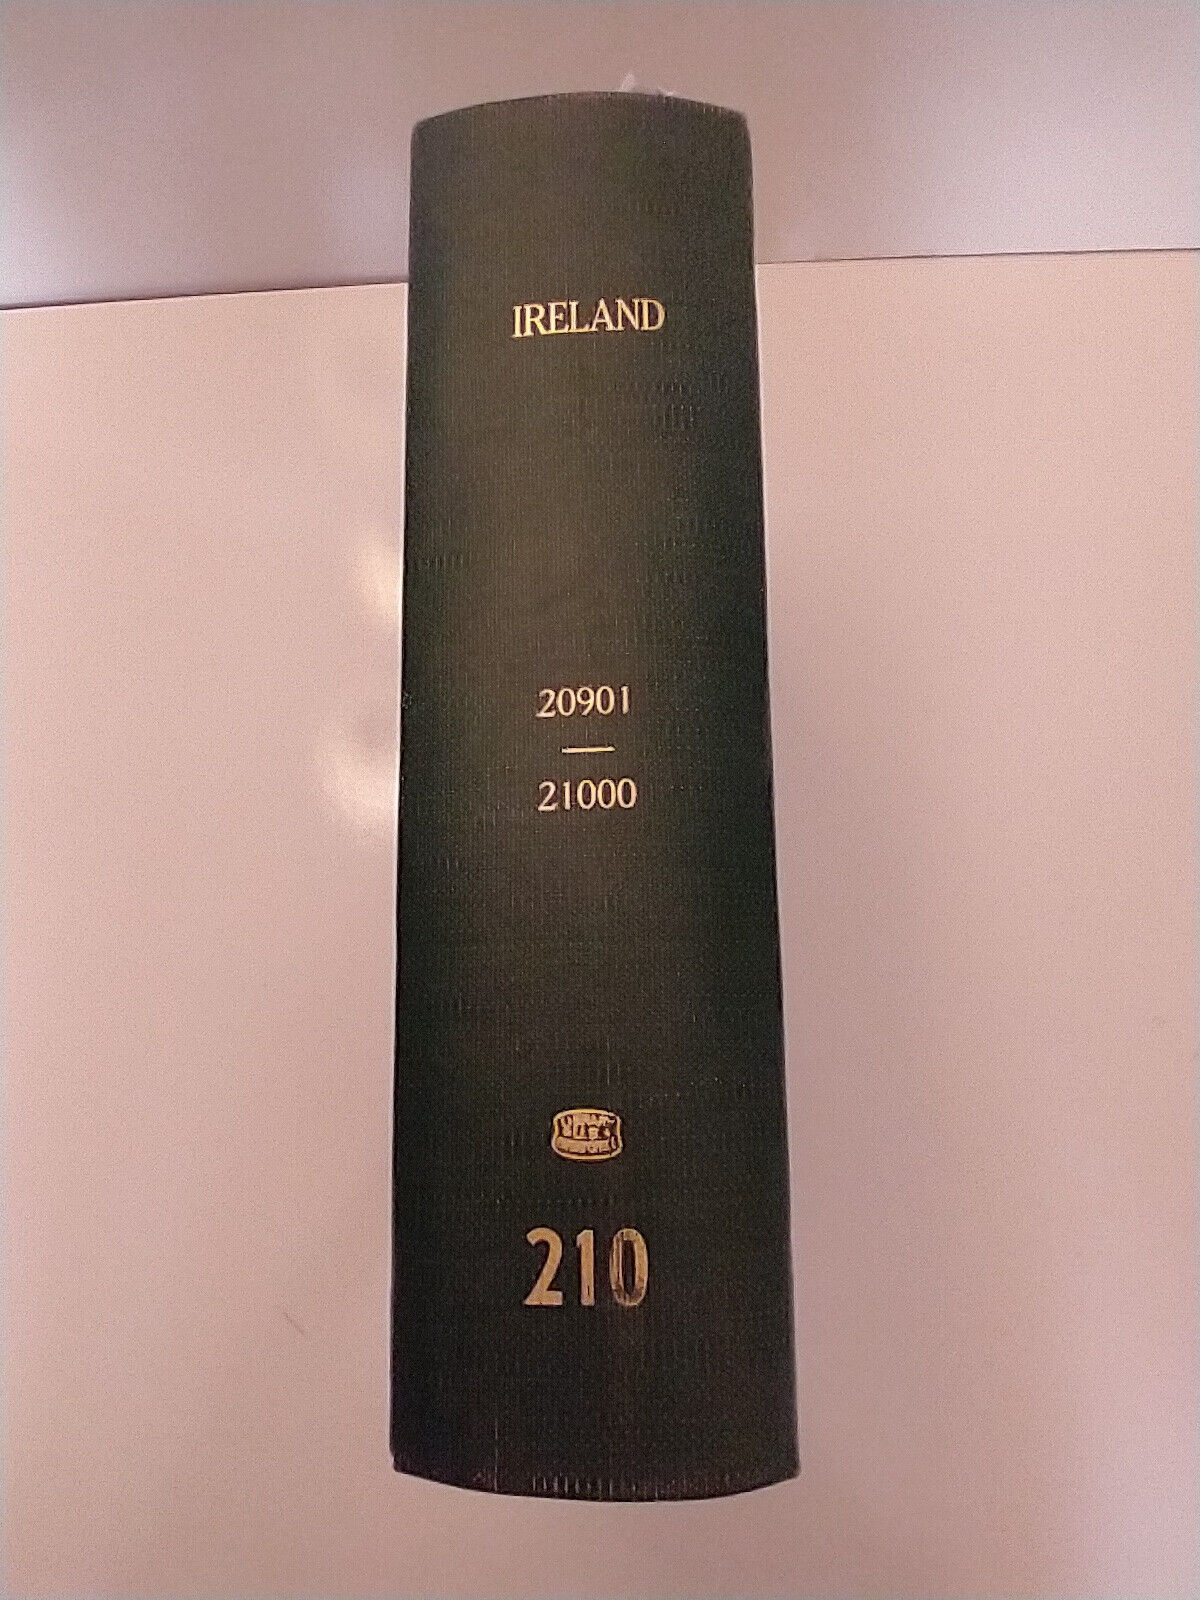 Irish Patent Specification Book Over 100 Pages; Many Foldout Pages w/ Drawings